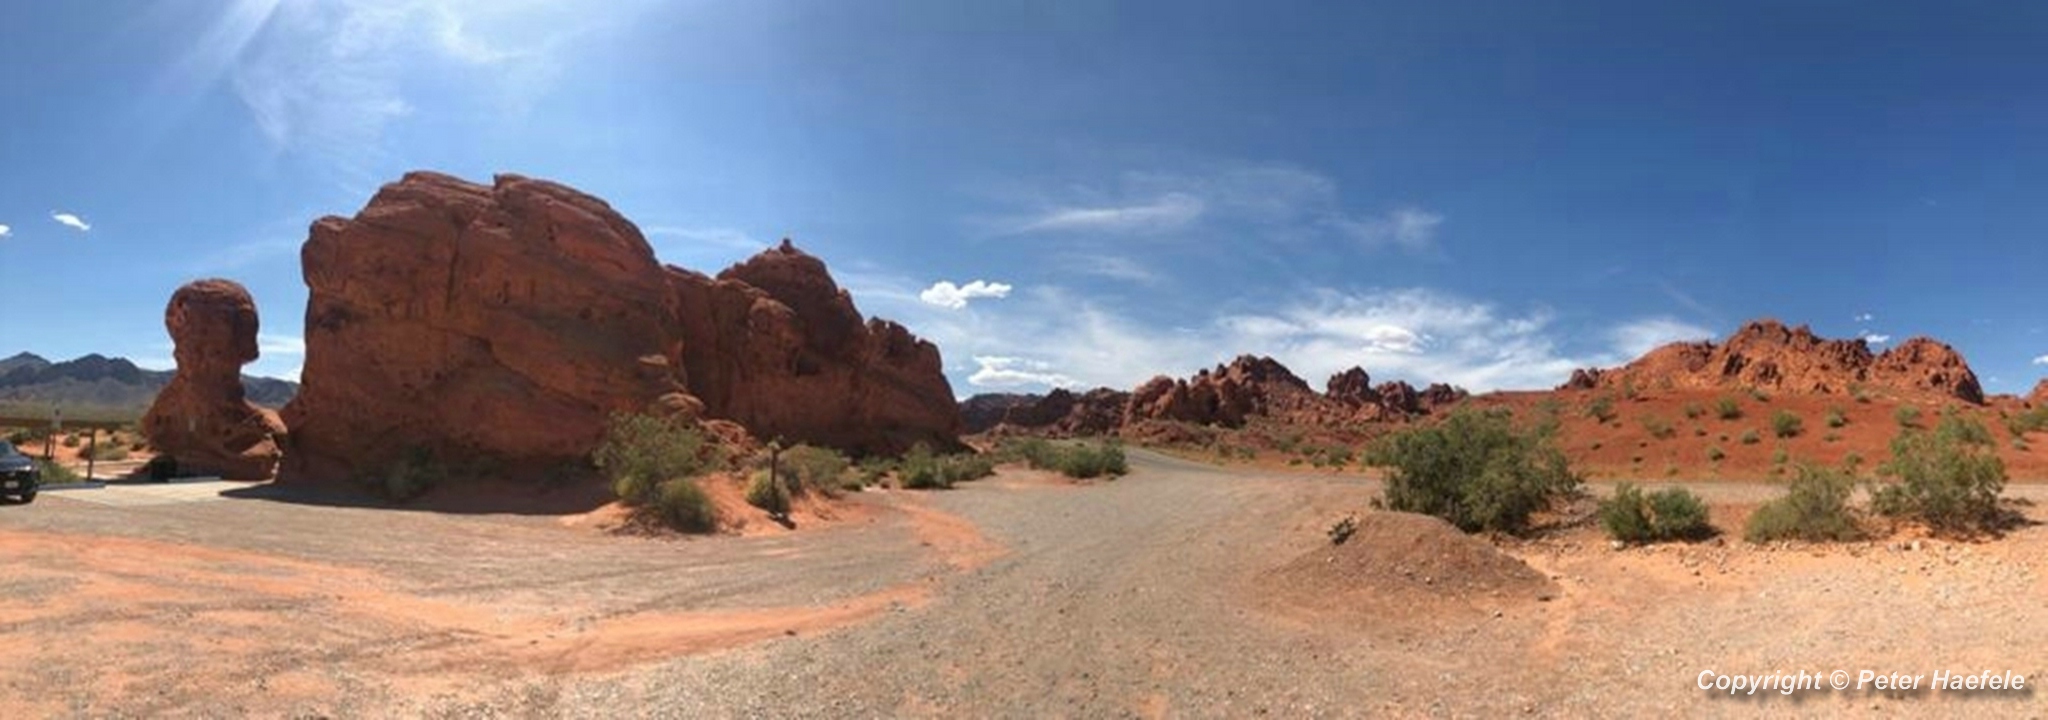 Roadtrip USA - Valley of Fire State Park - Nevada - Panorama